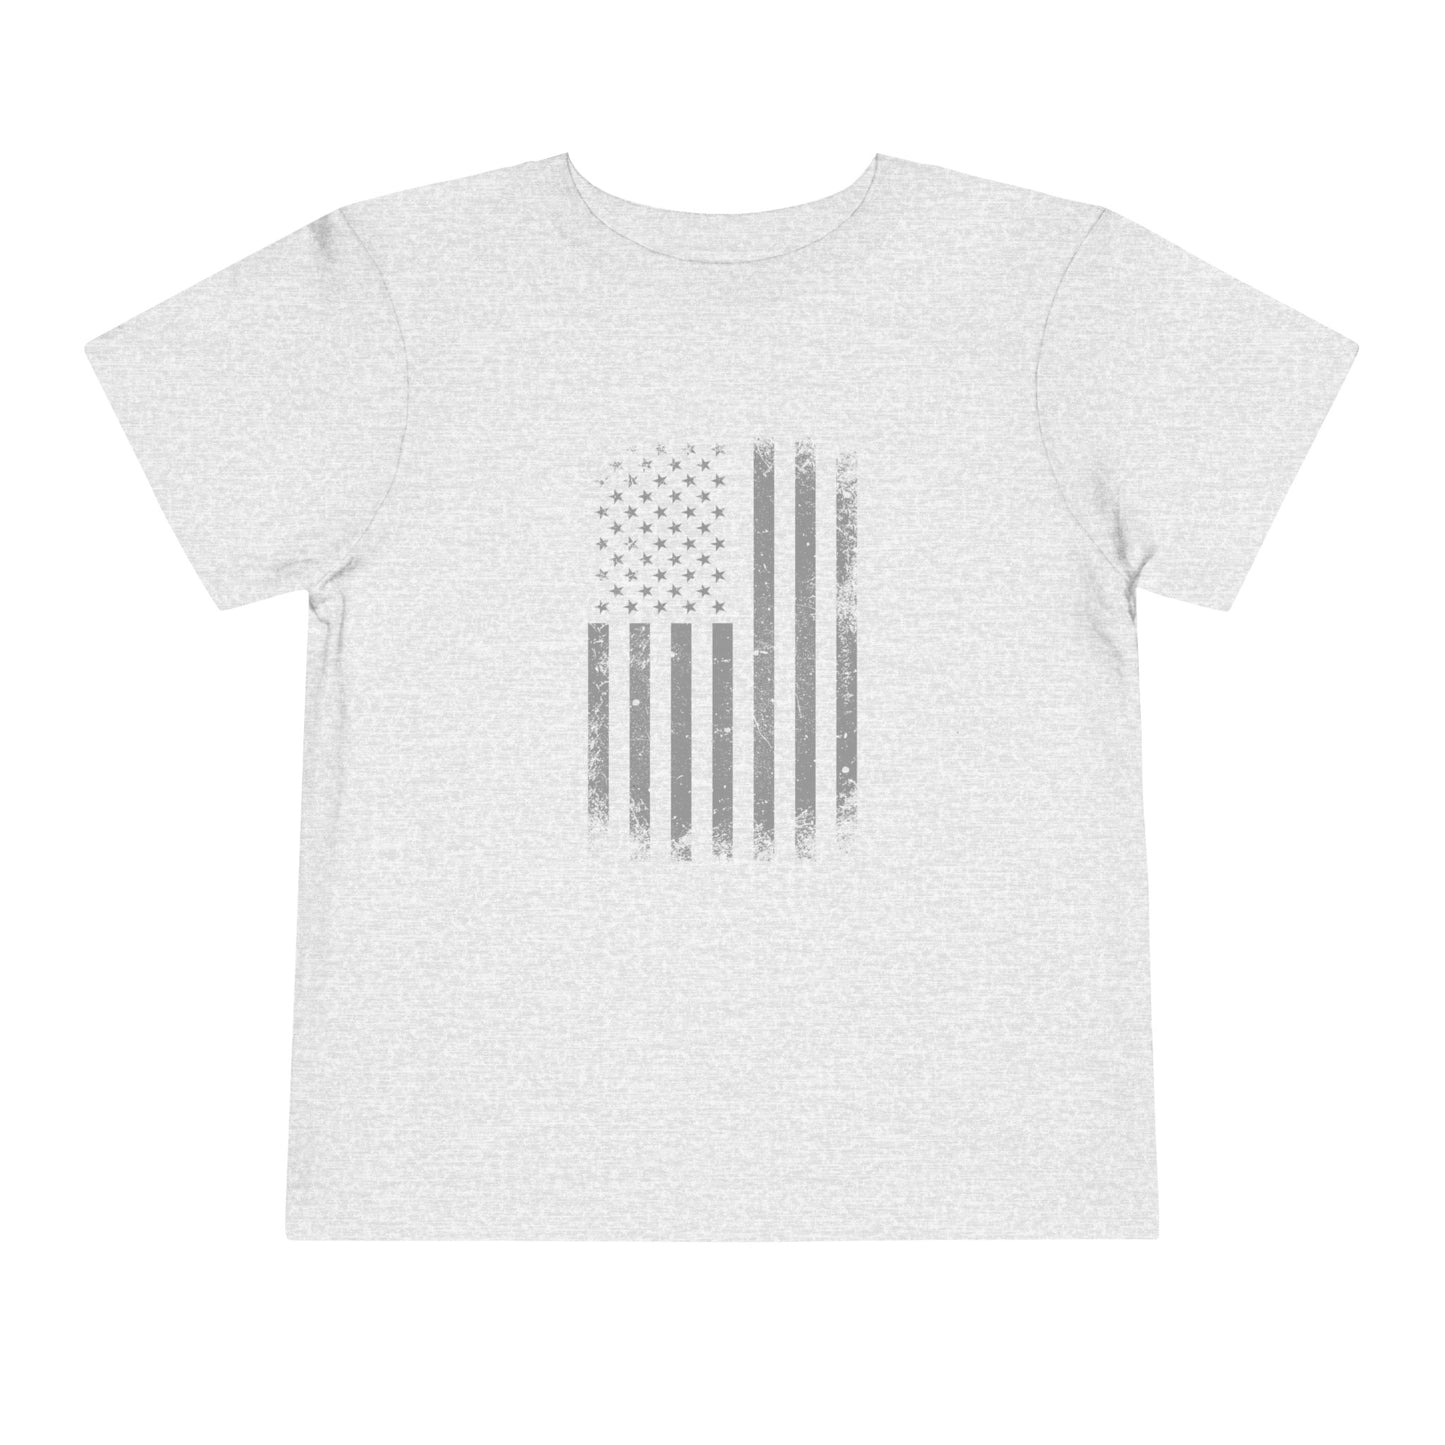 American Flag Toddler Heather Tee - Soft Airlume Cotton, Comfortable & Stylish